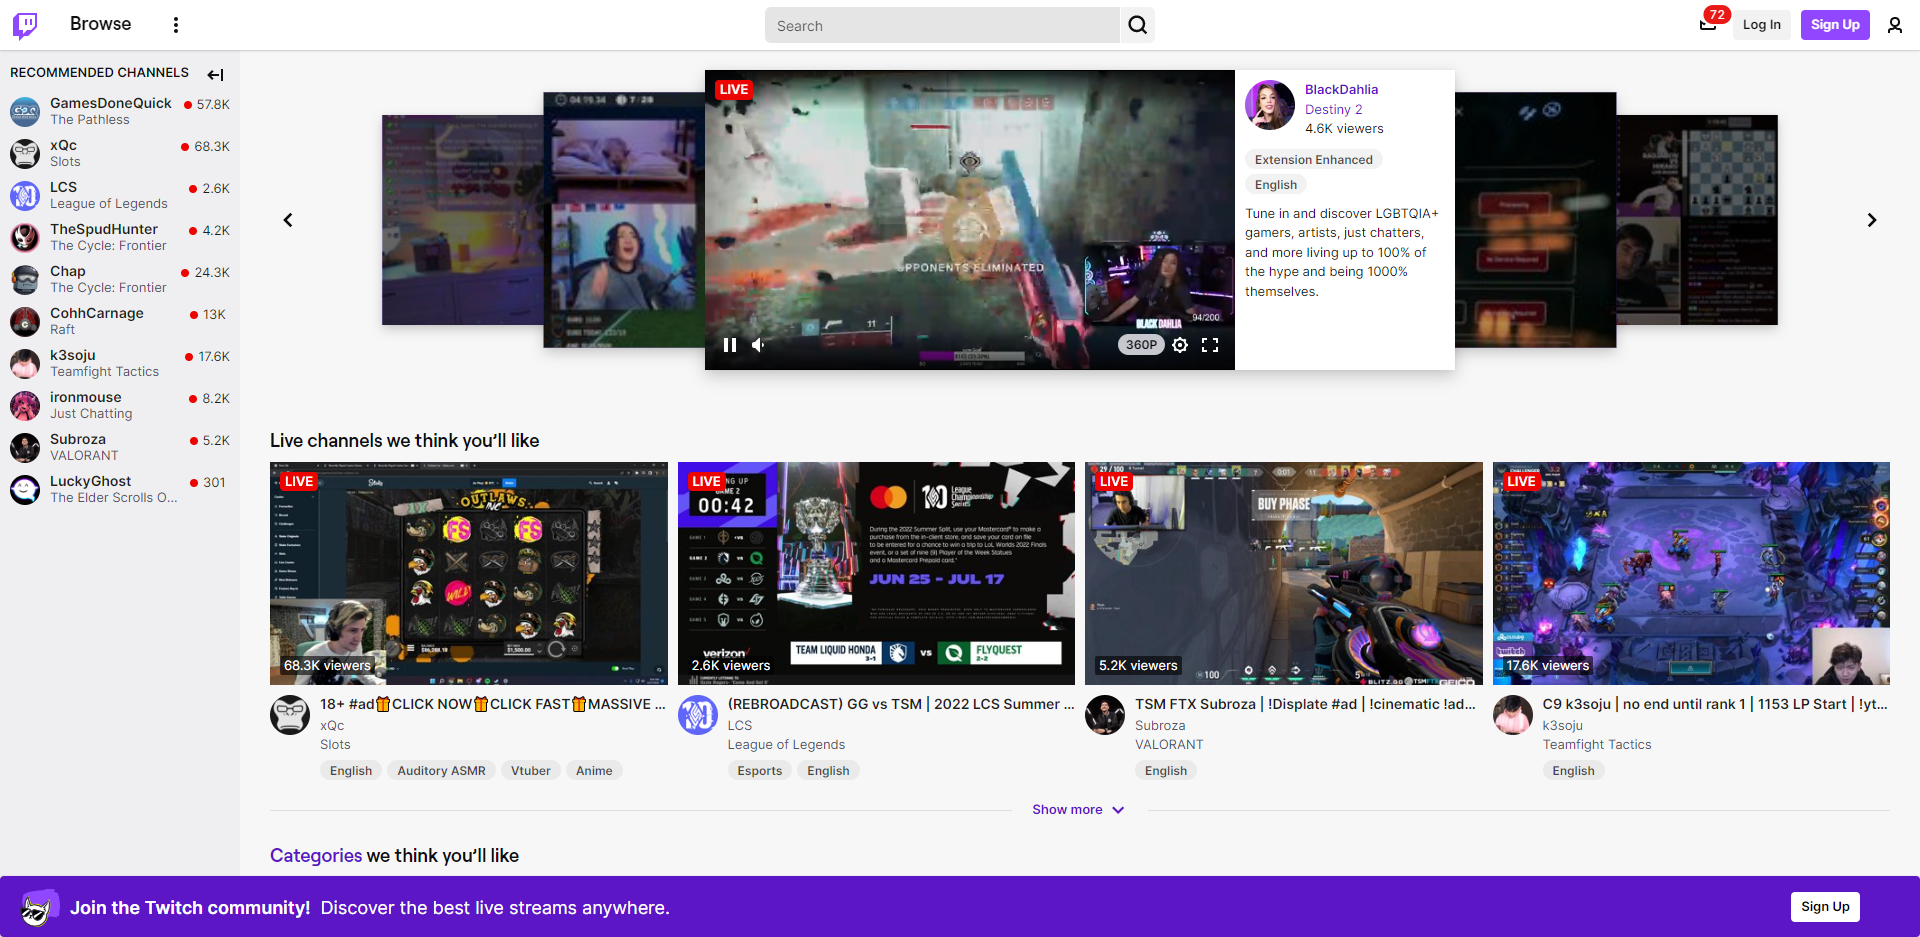 Screenshot Twitch.tv home page screen in July 25, 2022